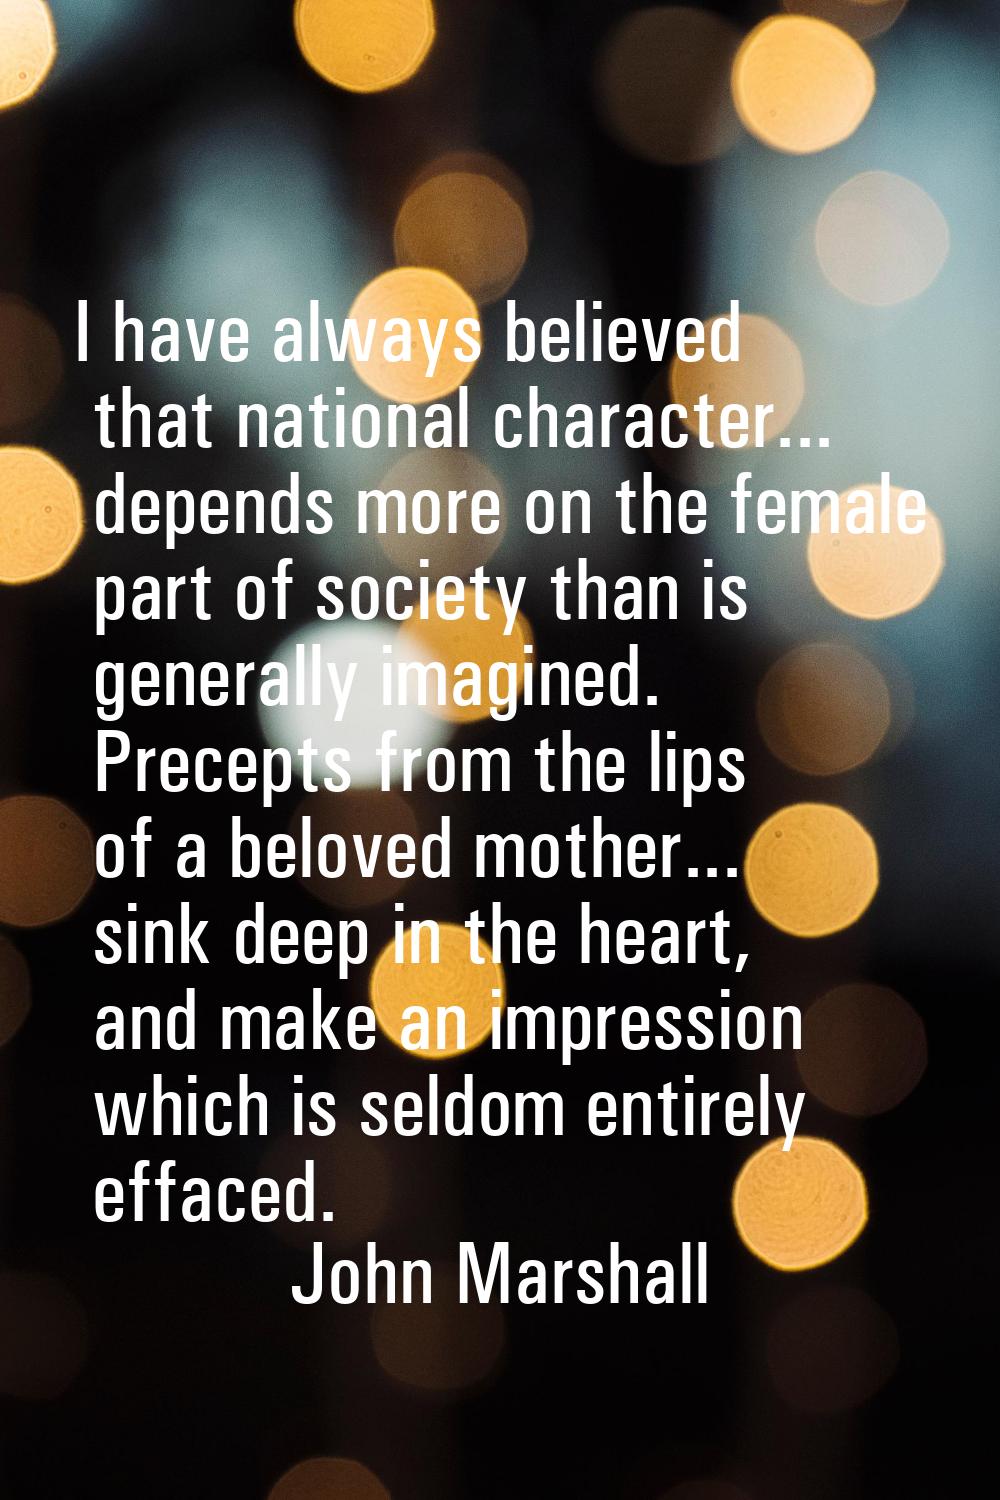 I have always believed that national character... depends more on the female part of society than i